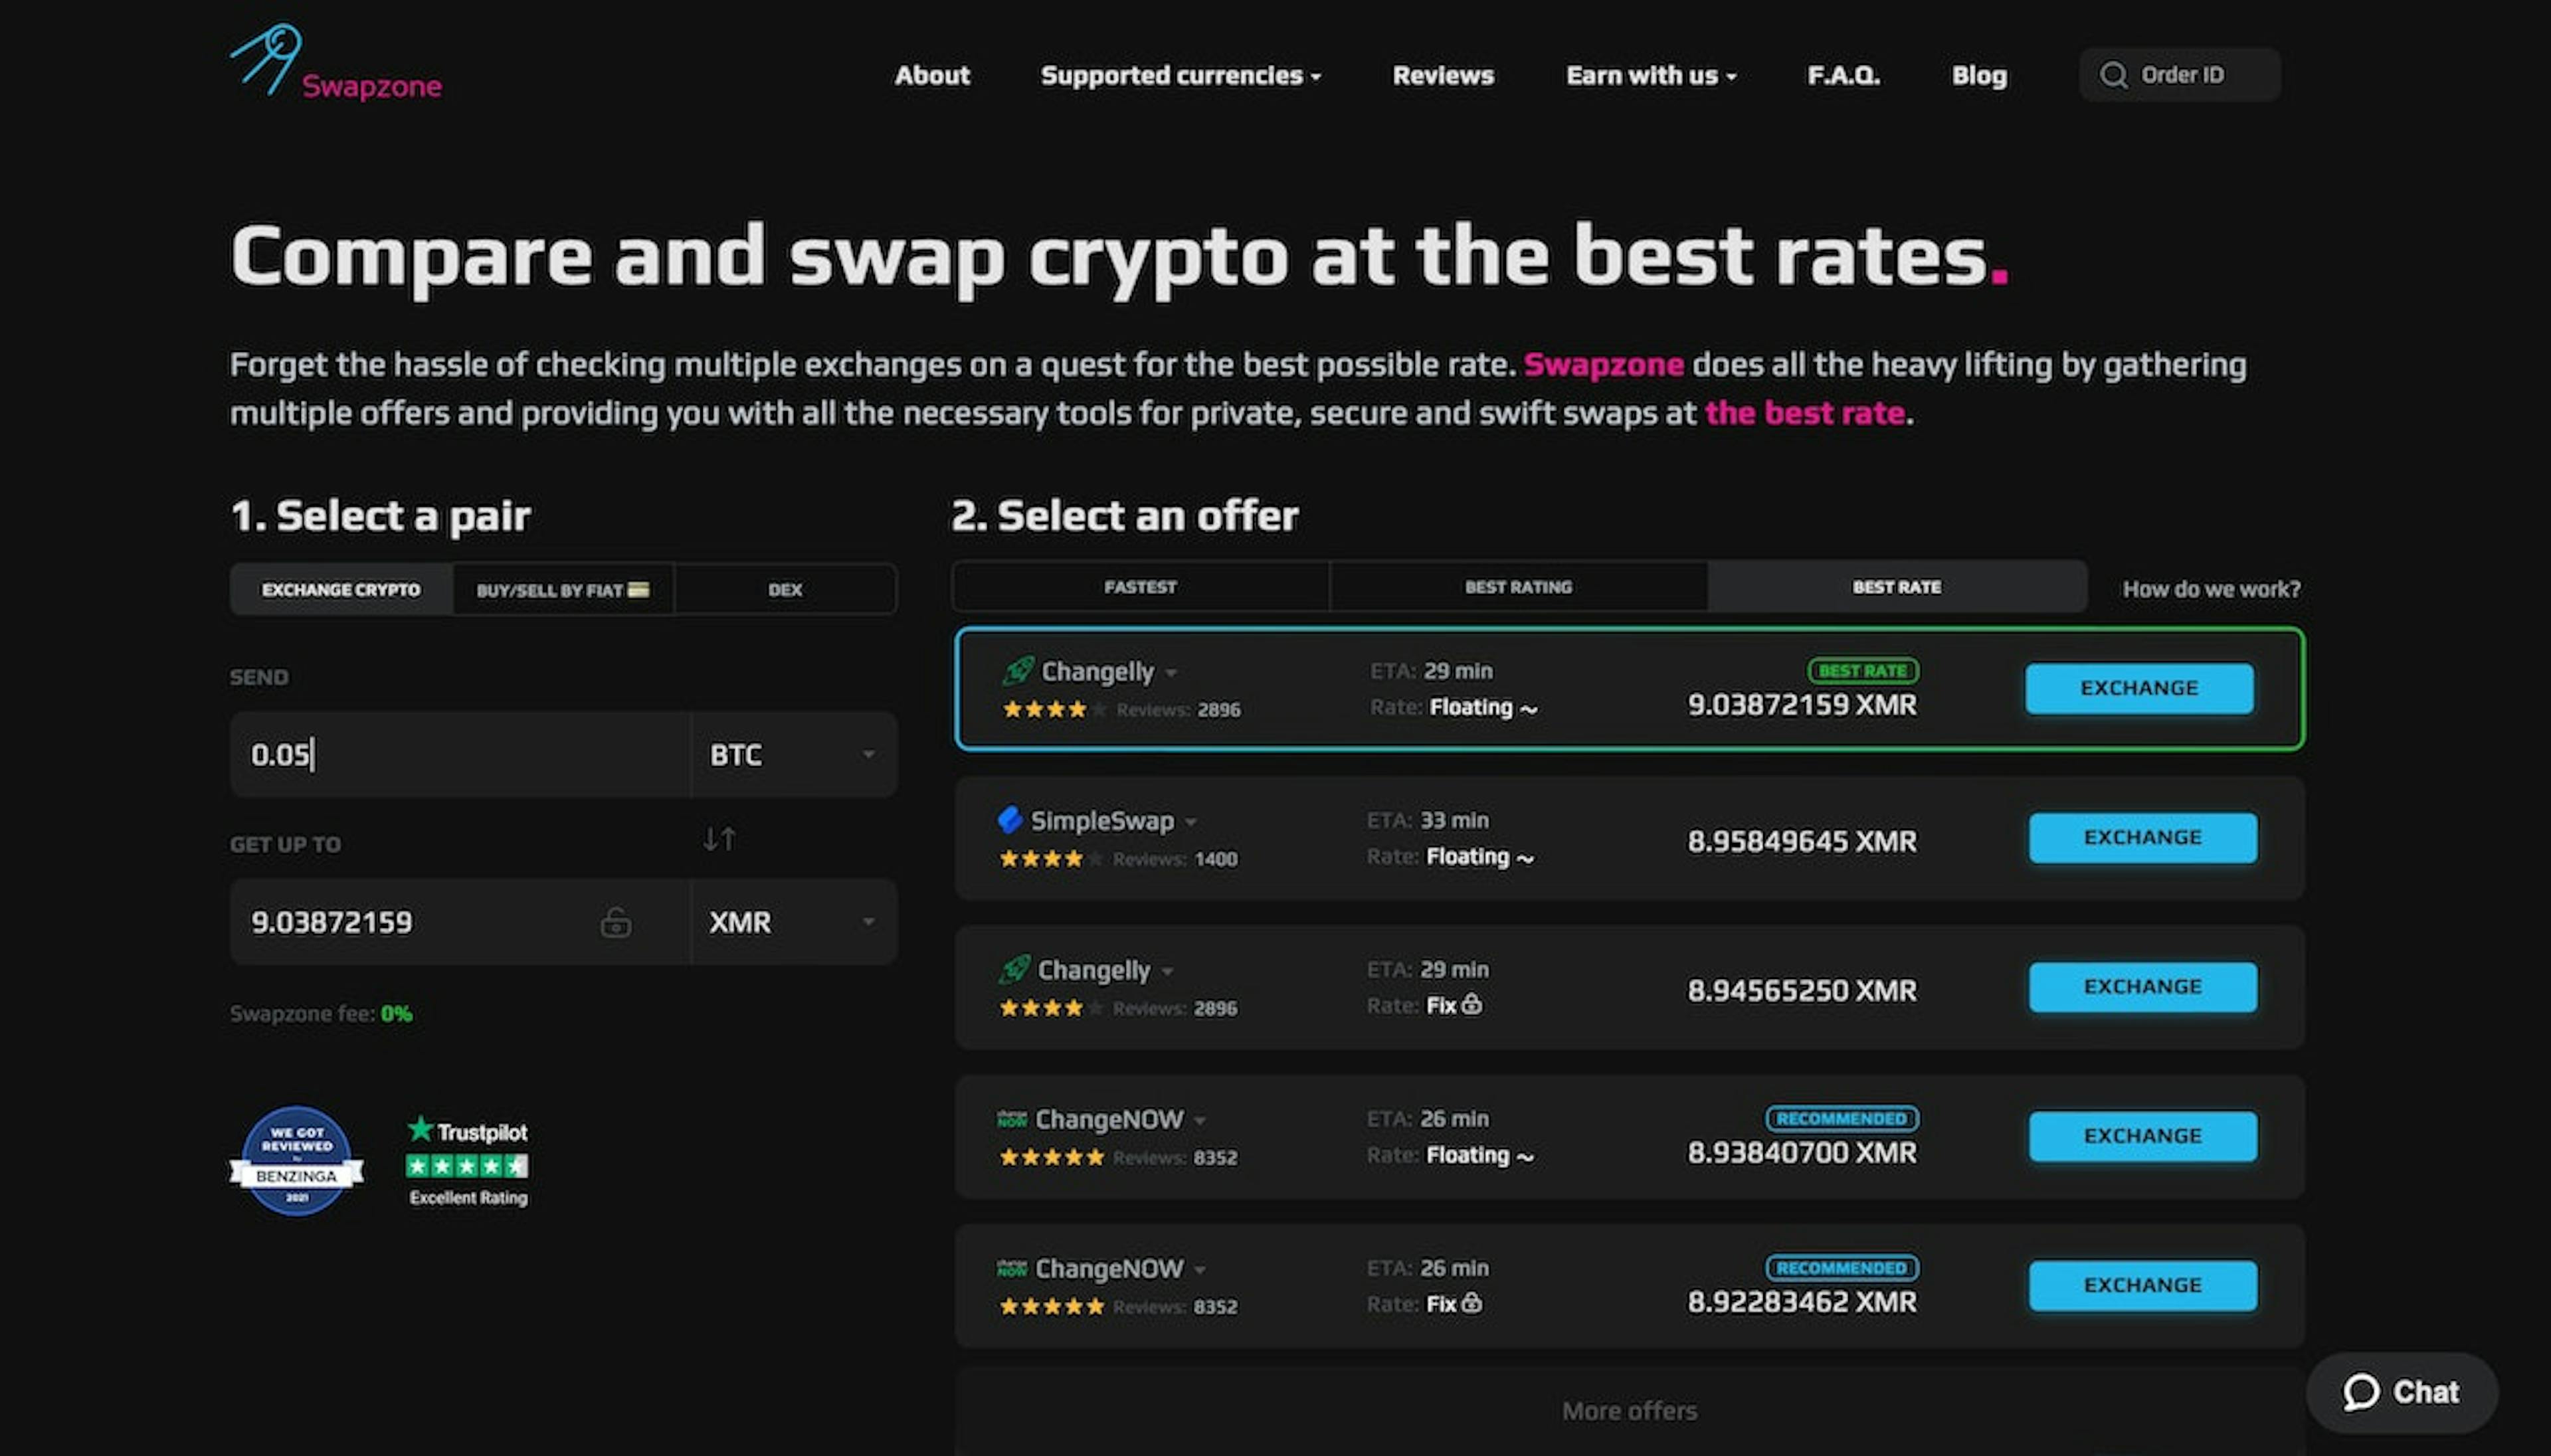 Swapzone is a crypto exchange aggregator offering the best rates for over 1600+ crypto assets